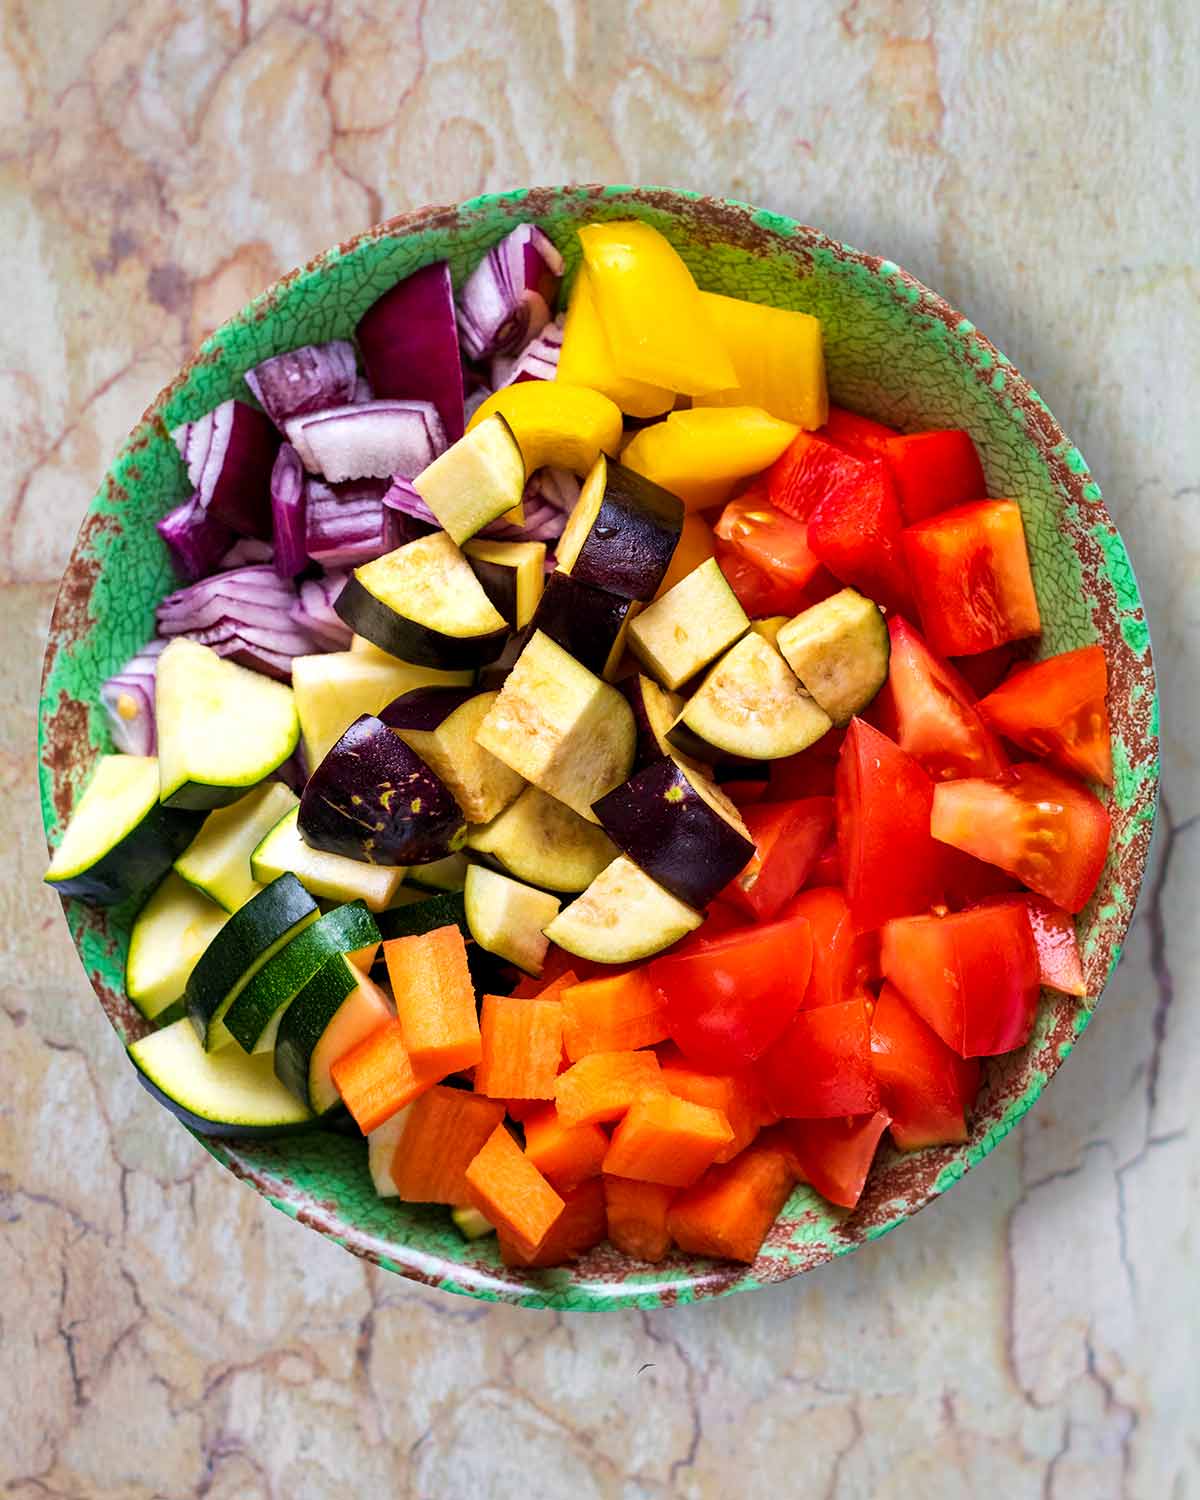 A green bowl full of chopped vegetables.